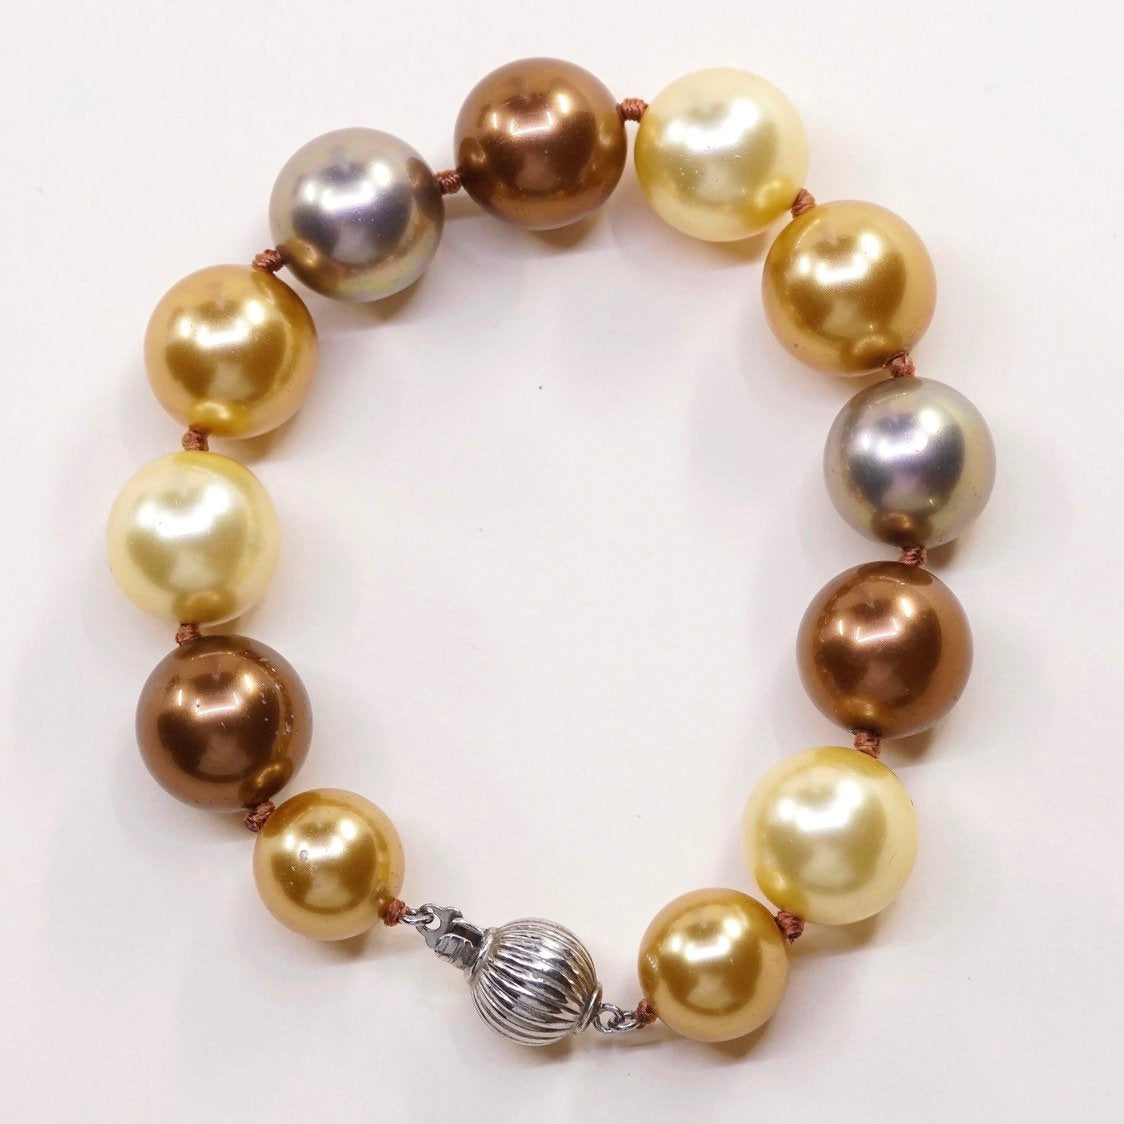 6.5”, Vintage handmade bracelet, gold and earth tone pearl beads w/ 925 clasp